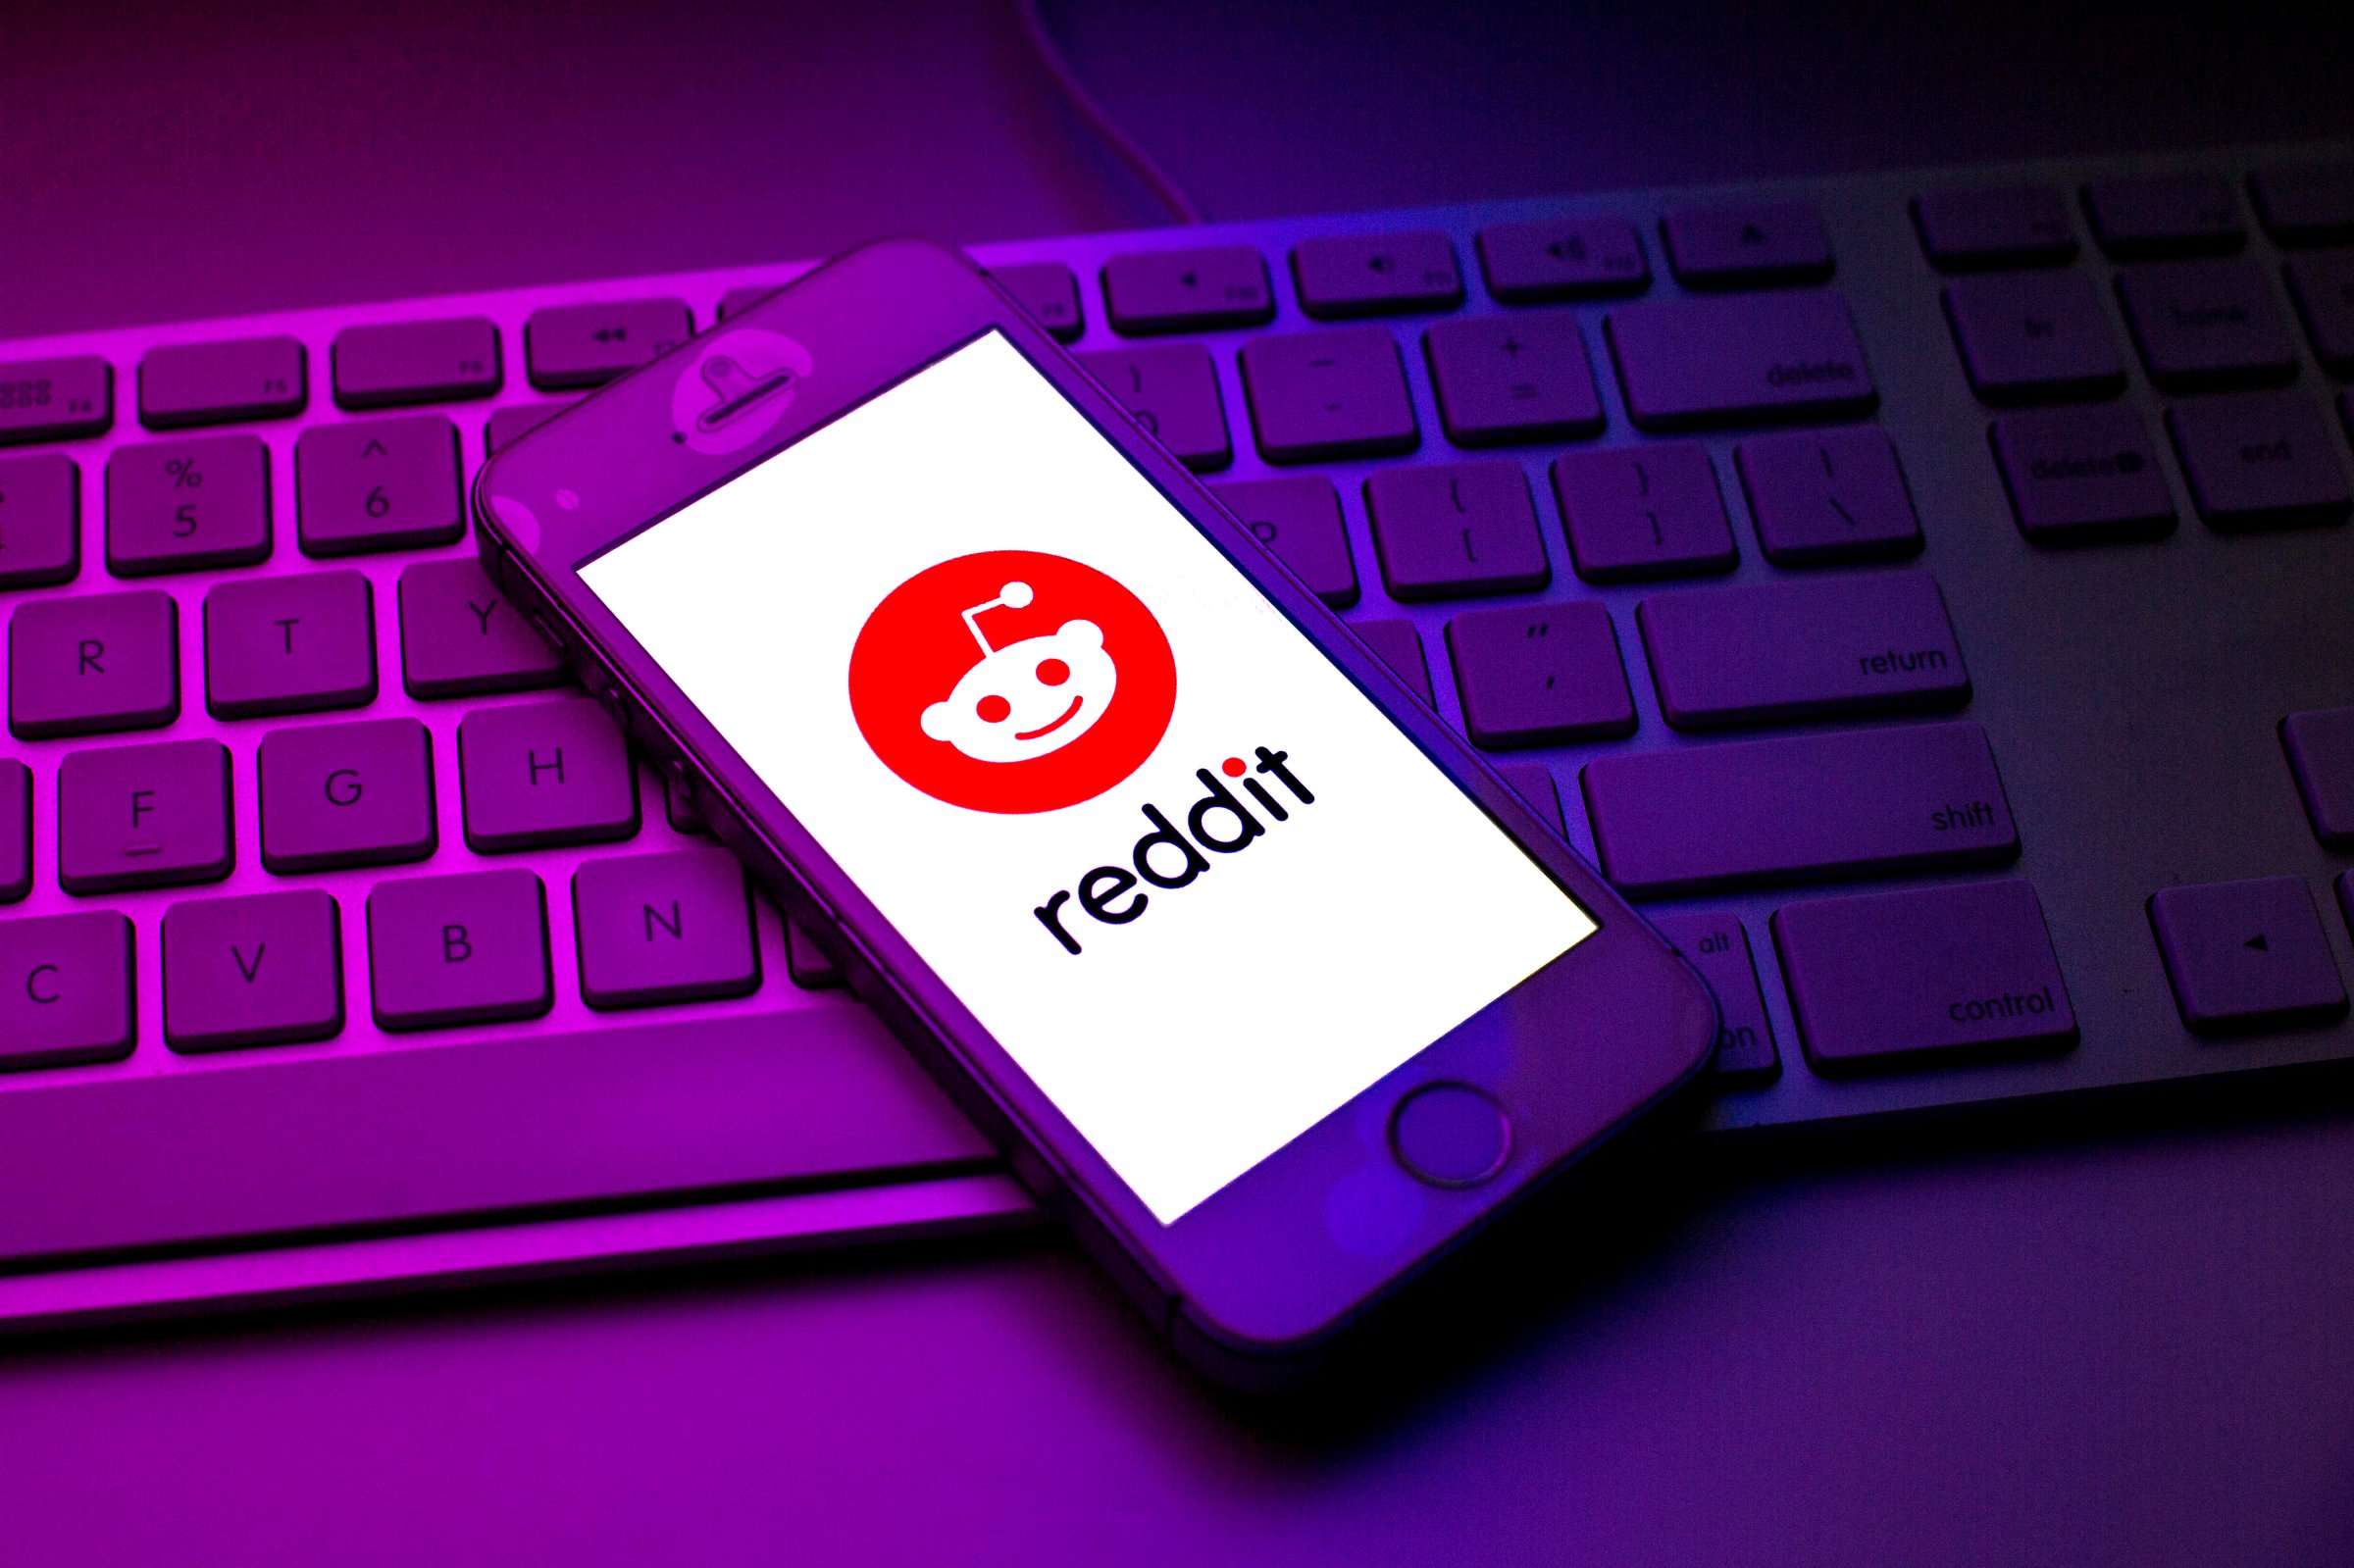 Reddit logo seen displayed on a smartphone on top of a computer keyboard.